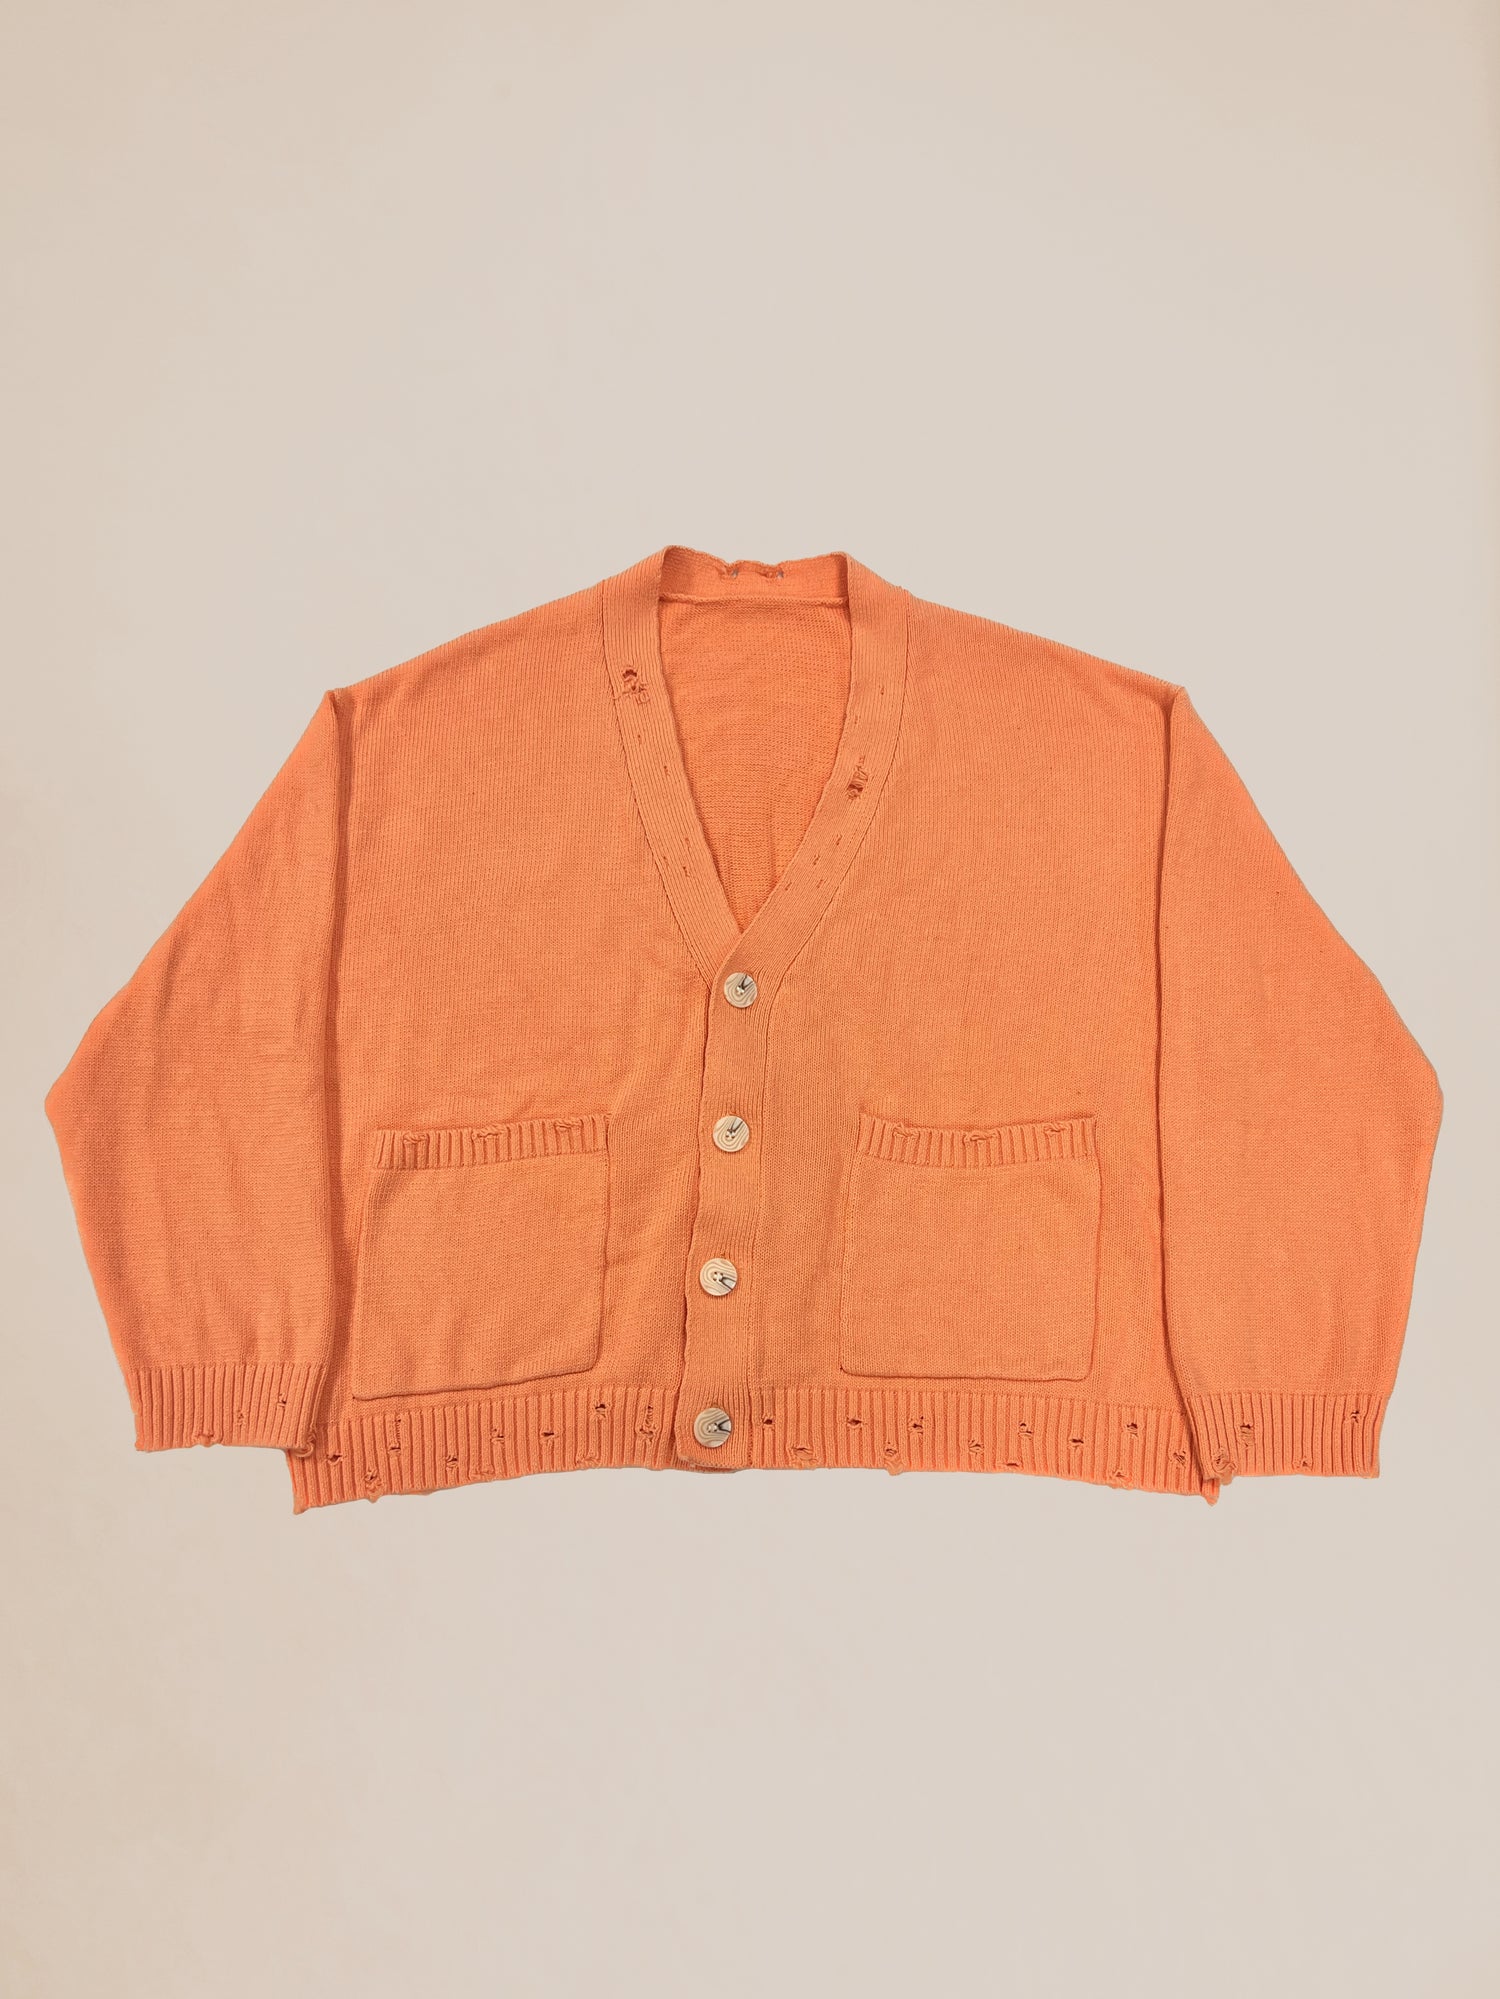 Orange Profound Sample 22 distressed knitted cardigan sweater with buttons displayed on a neutral background.